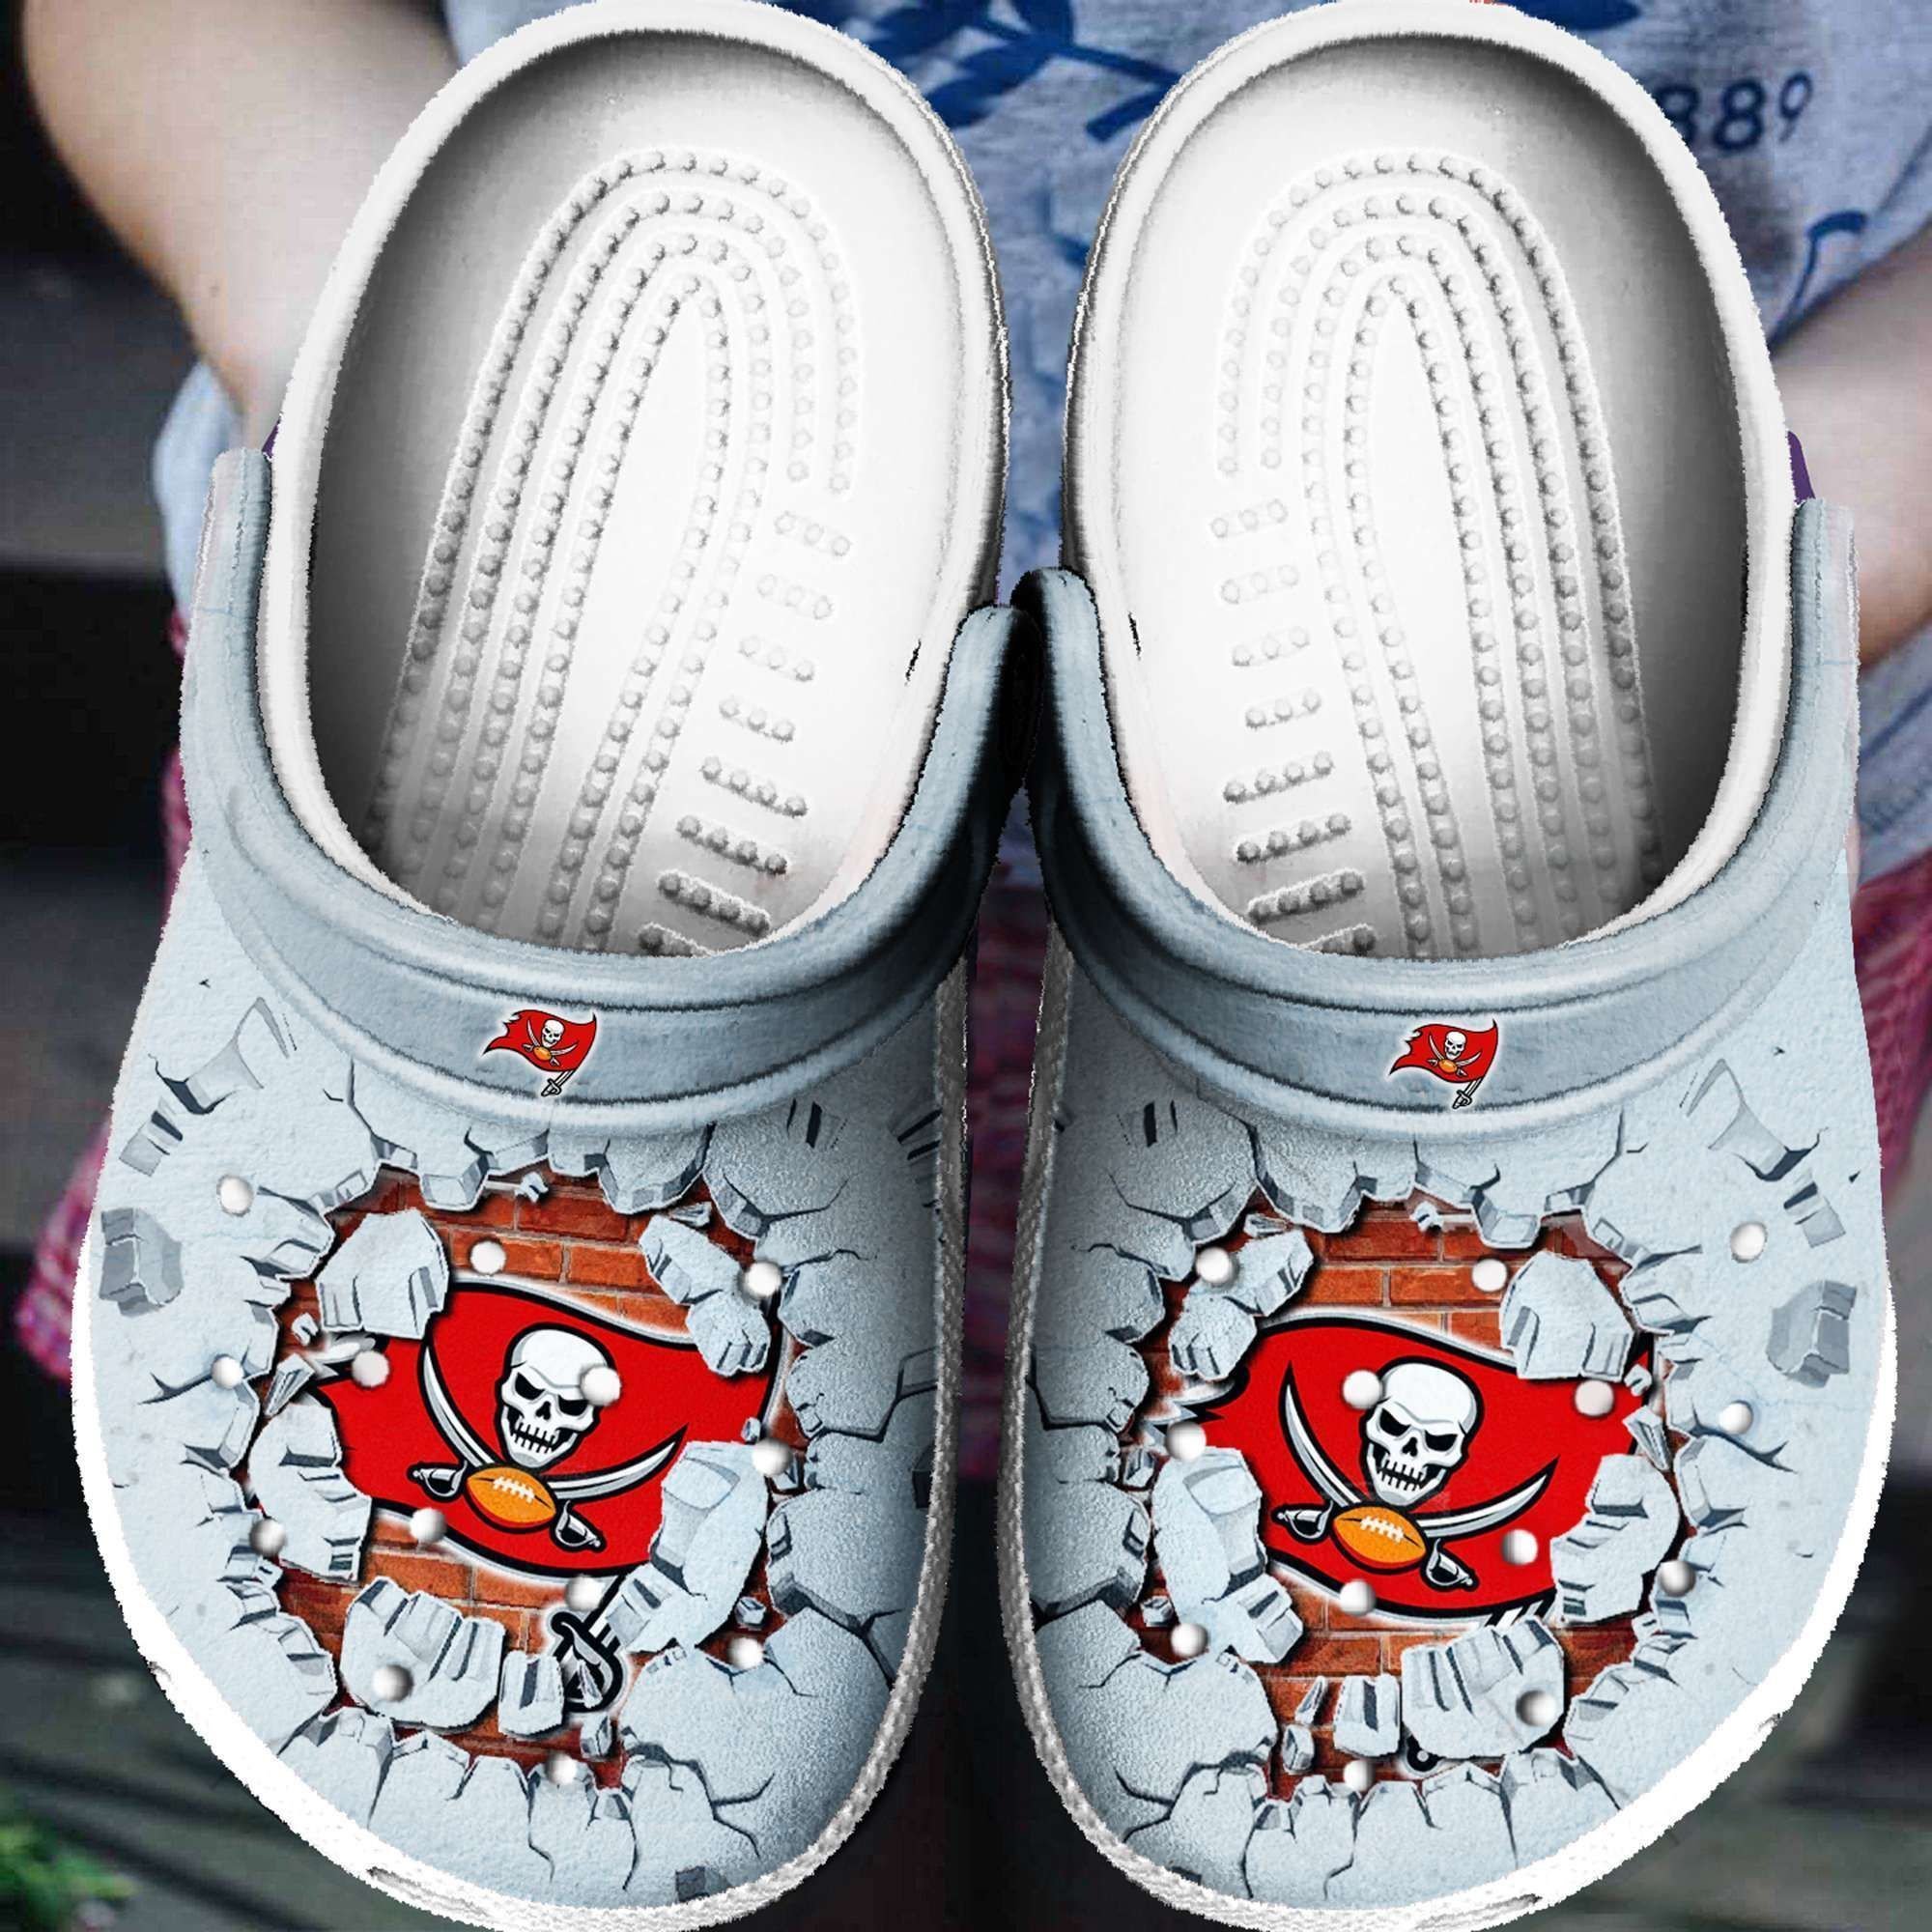 Tampa Bay Buccaneers Skull Pattern Crocs Classic Clogs Shoes In Blue & Red